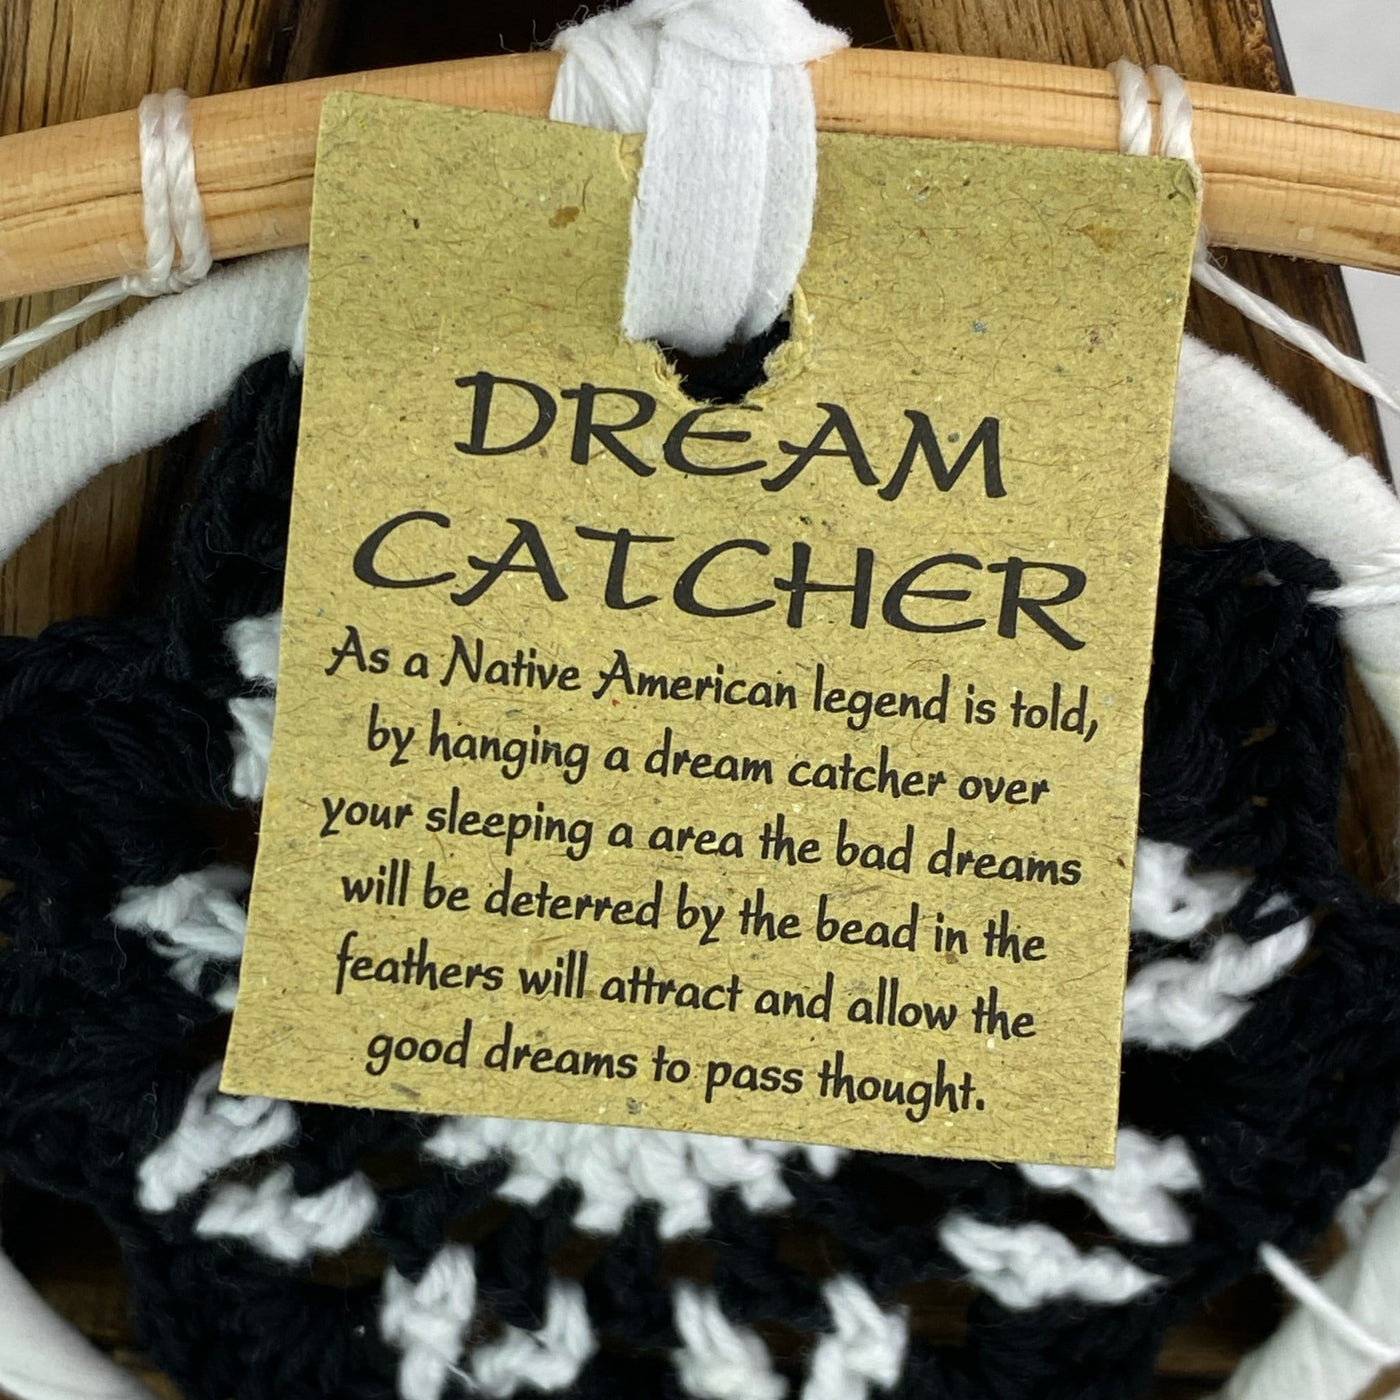 Tag on Dream catcher reads DREAM CATCHER As a native American legend is told, by hanging a dream catcher over your sleeping area the bad dreams will be deterred by the bead in the feathers will attract and allow the good dreams to pass thought.